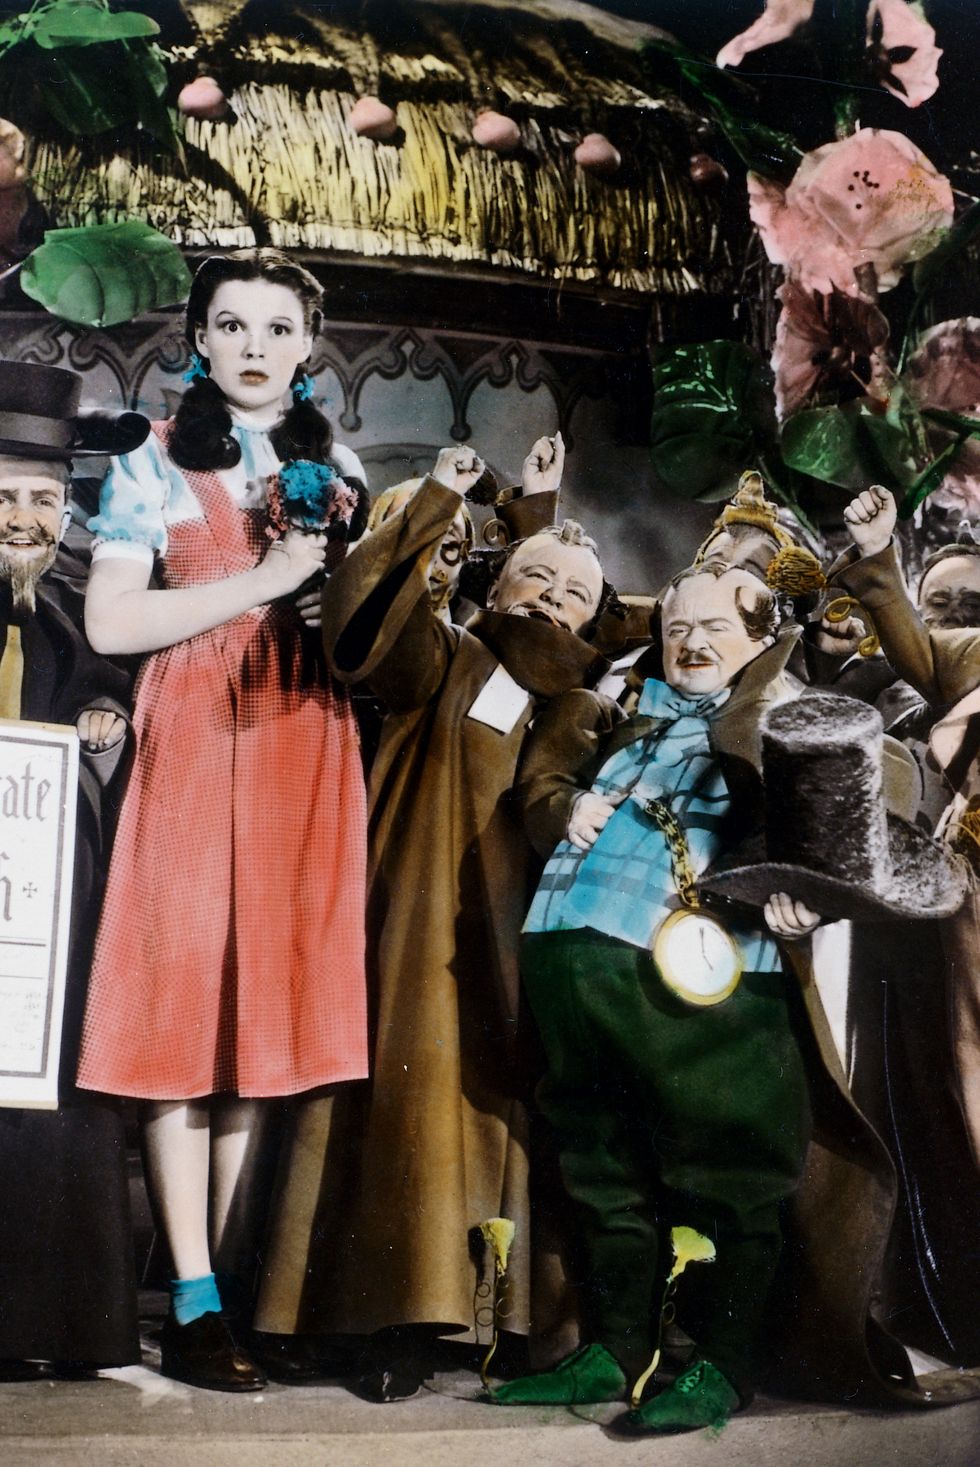 Colourised shot of Judy Garland (1922-1969), US actress and singer, in costume and surrounded by a group of munchkins, in a publicity still from the film, 'The Wizard of Oz', 1939. The musical, adapted from the novel by L Frank Baum (1856-1919) and directed by Victor Fleming (1889-1949), starred Garland as 'Dorthy Gale'.